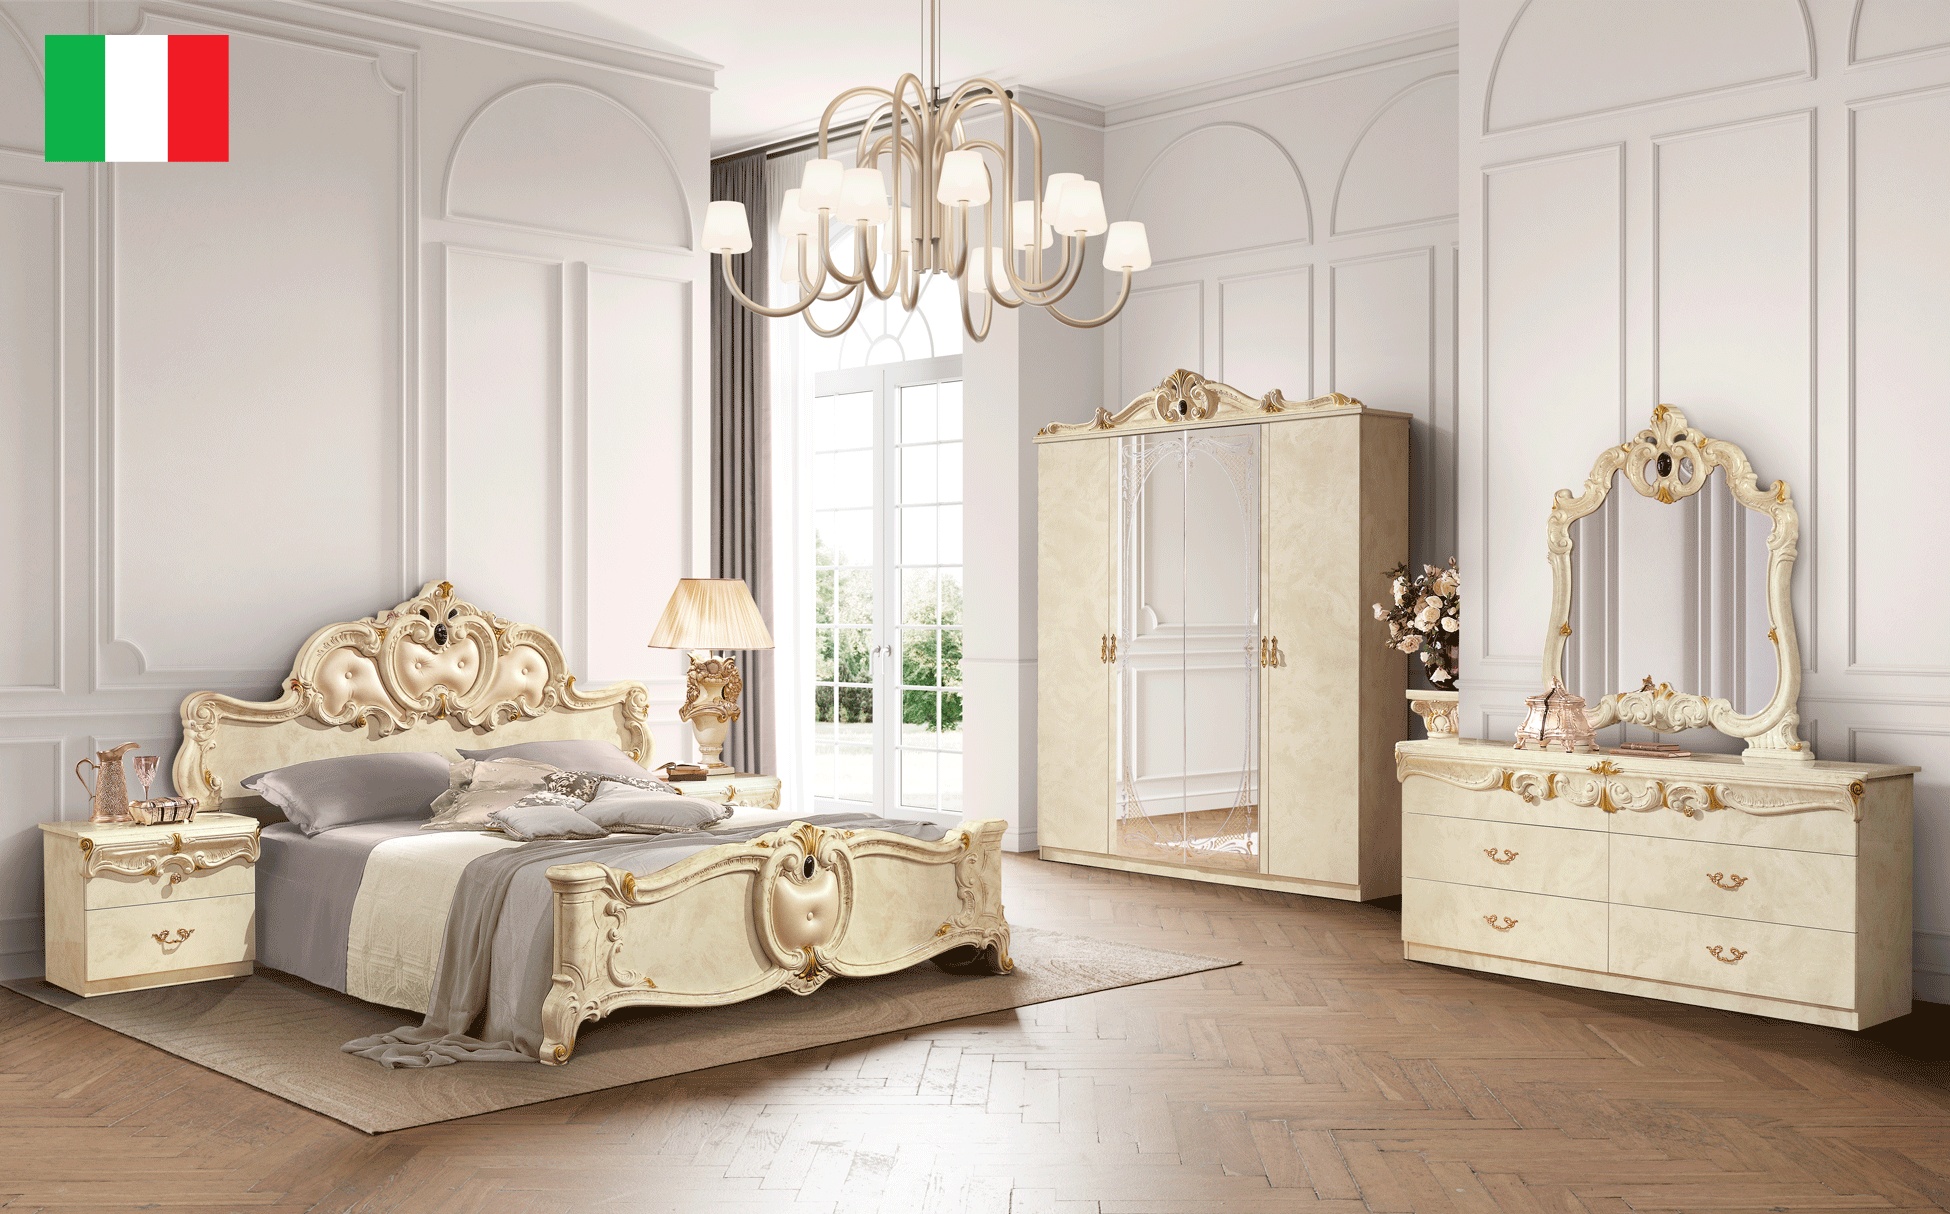 Bedroom Furniture Dressers and Chests Barocco Ivory Bedroom